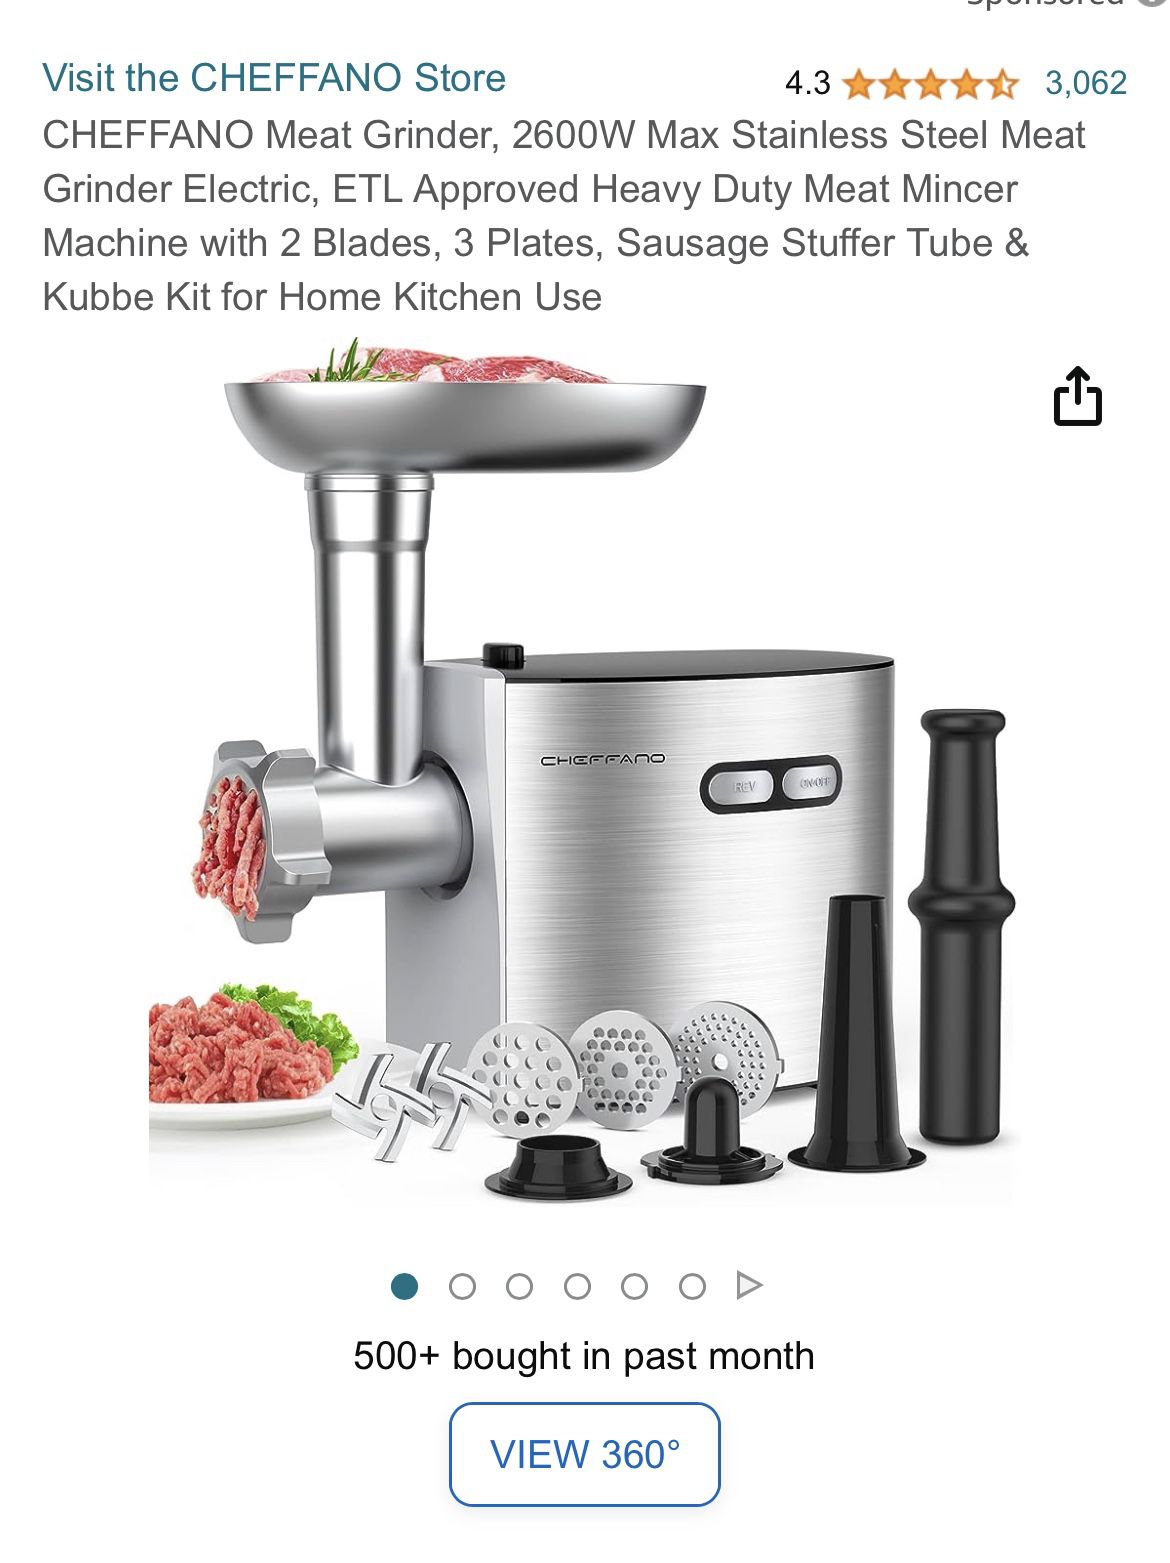 CHEFFANO Meat Grinder, 2600W Max Stainless Steel Meat Grinder Electric for  Sale in West Palm Beach, FL OfferUp